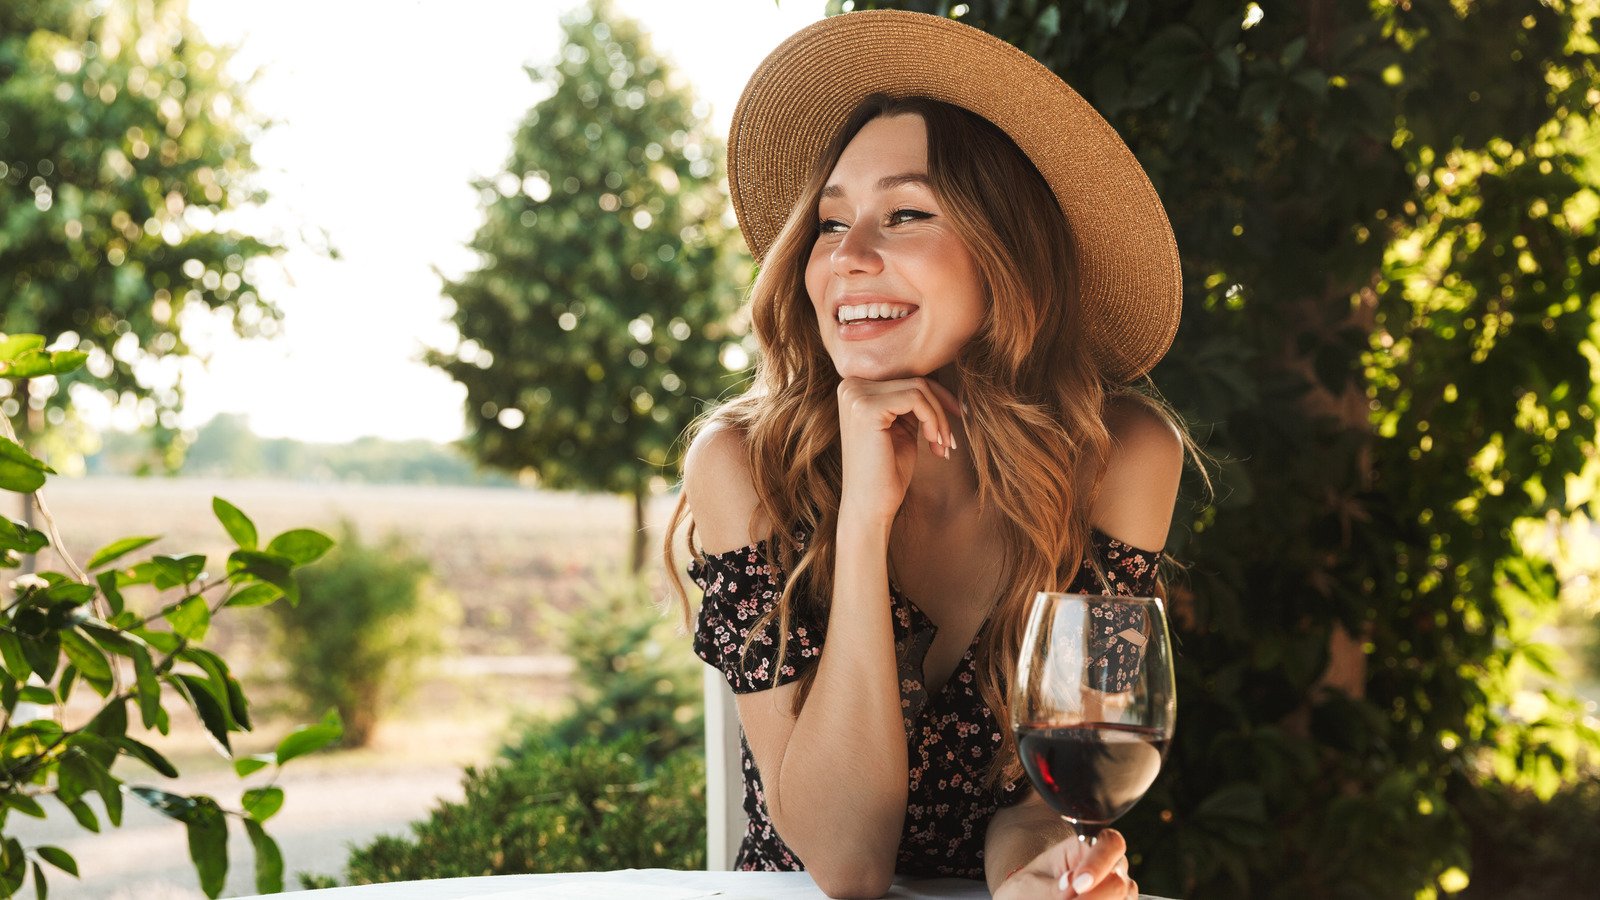 Drinking wine might make you more attractive. Here's why